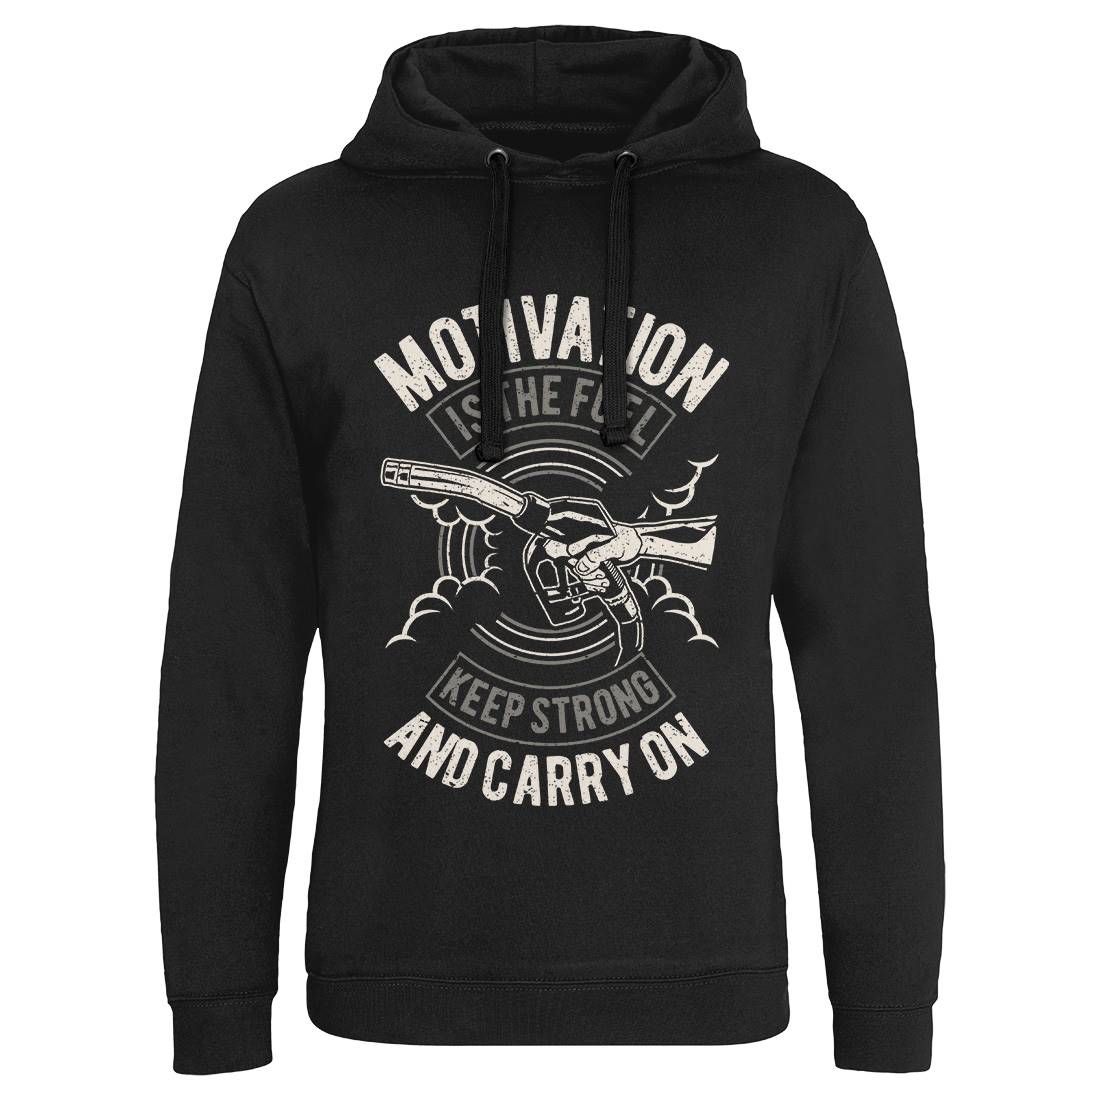 Motivation Is The Fuel Mens Hoodie Without Pocket Gym A717